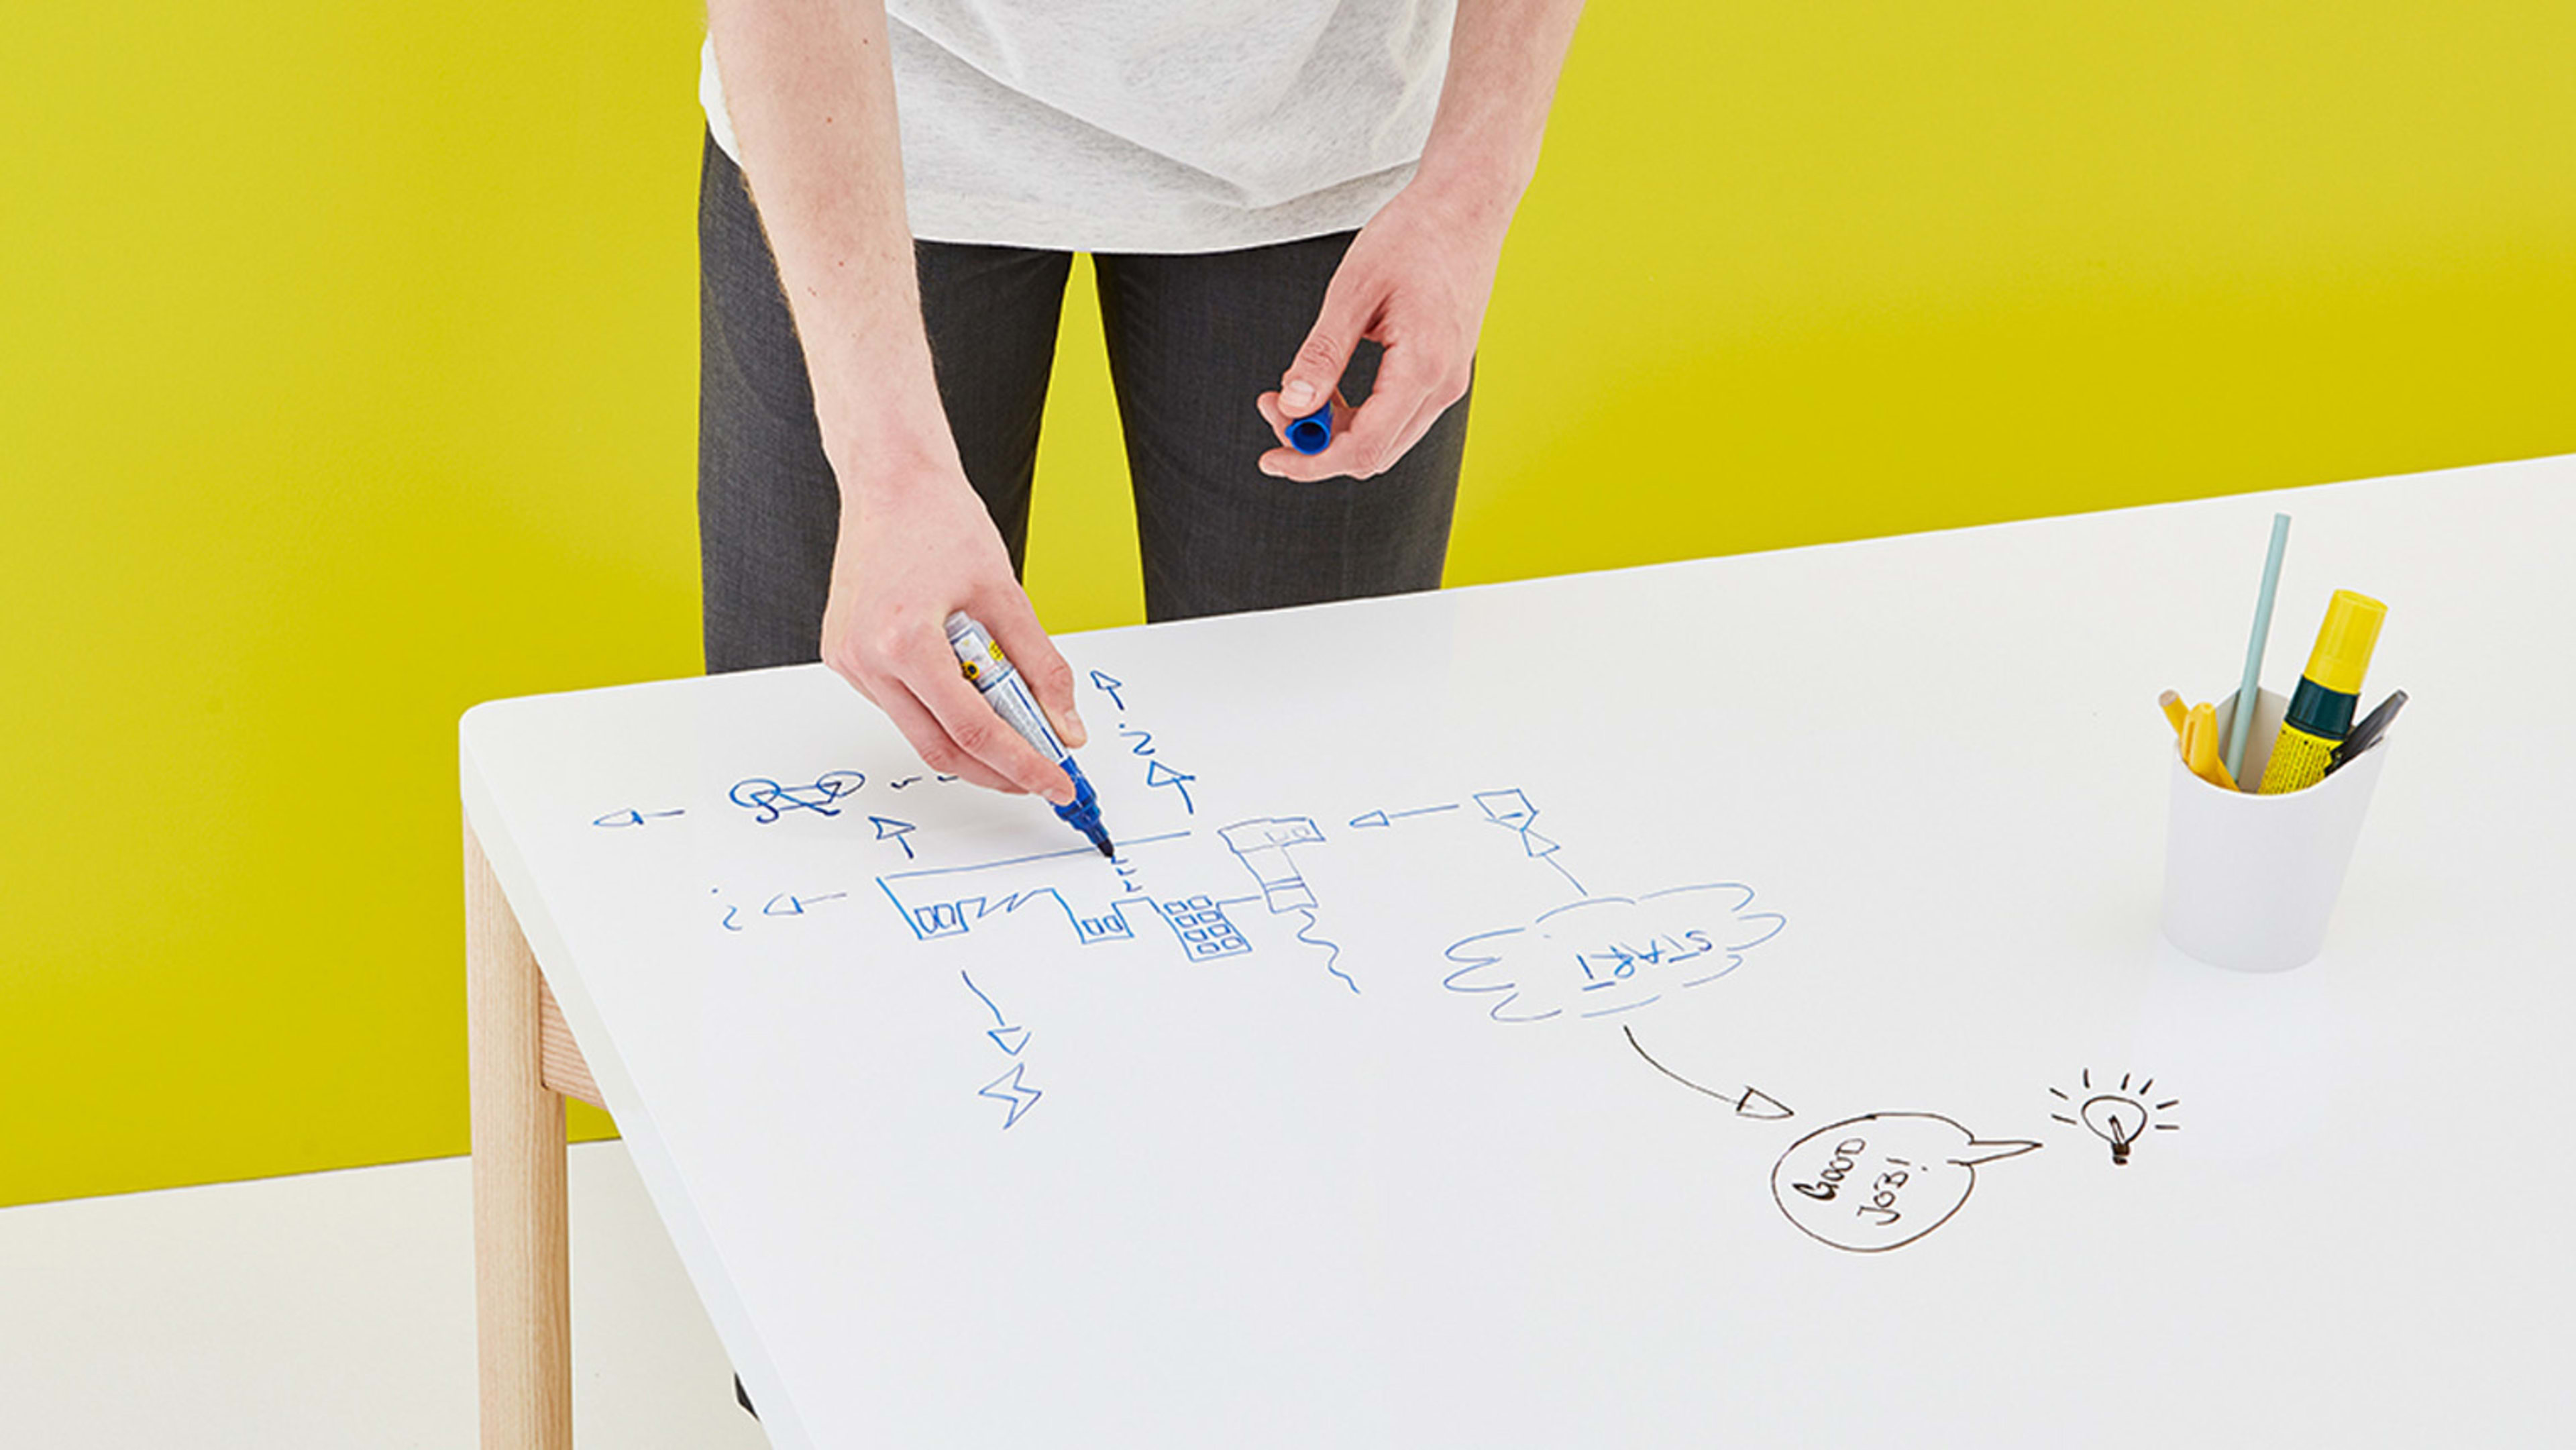 The simplest whiteboard redesign is also the best